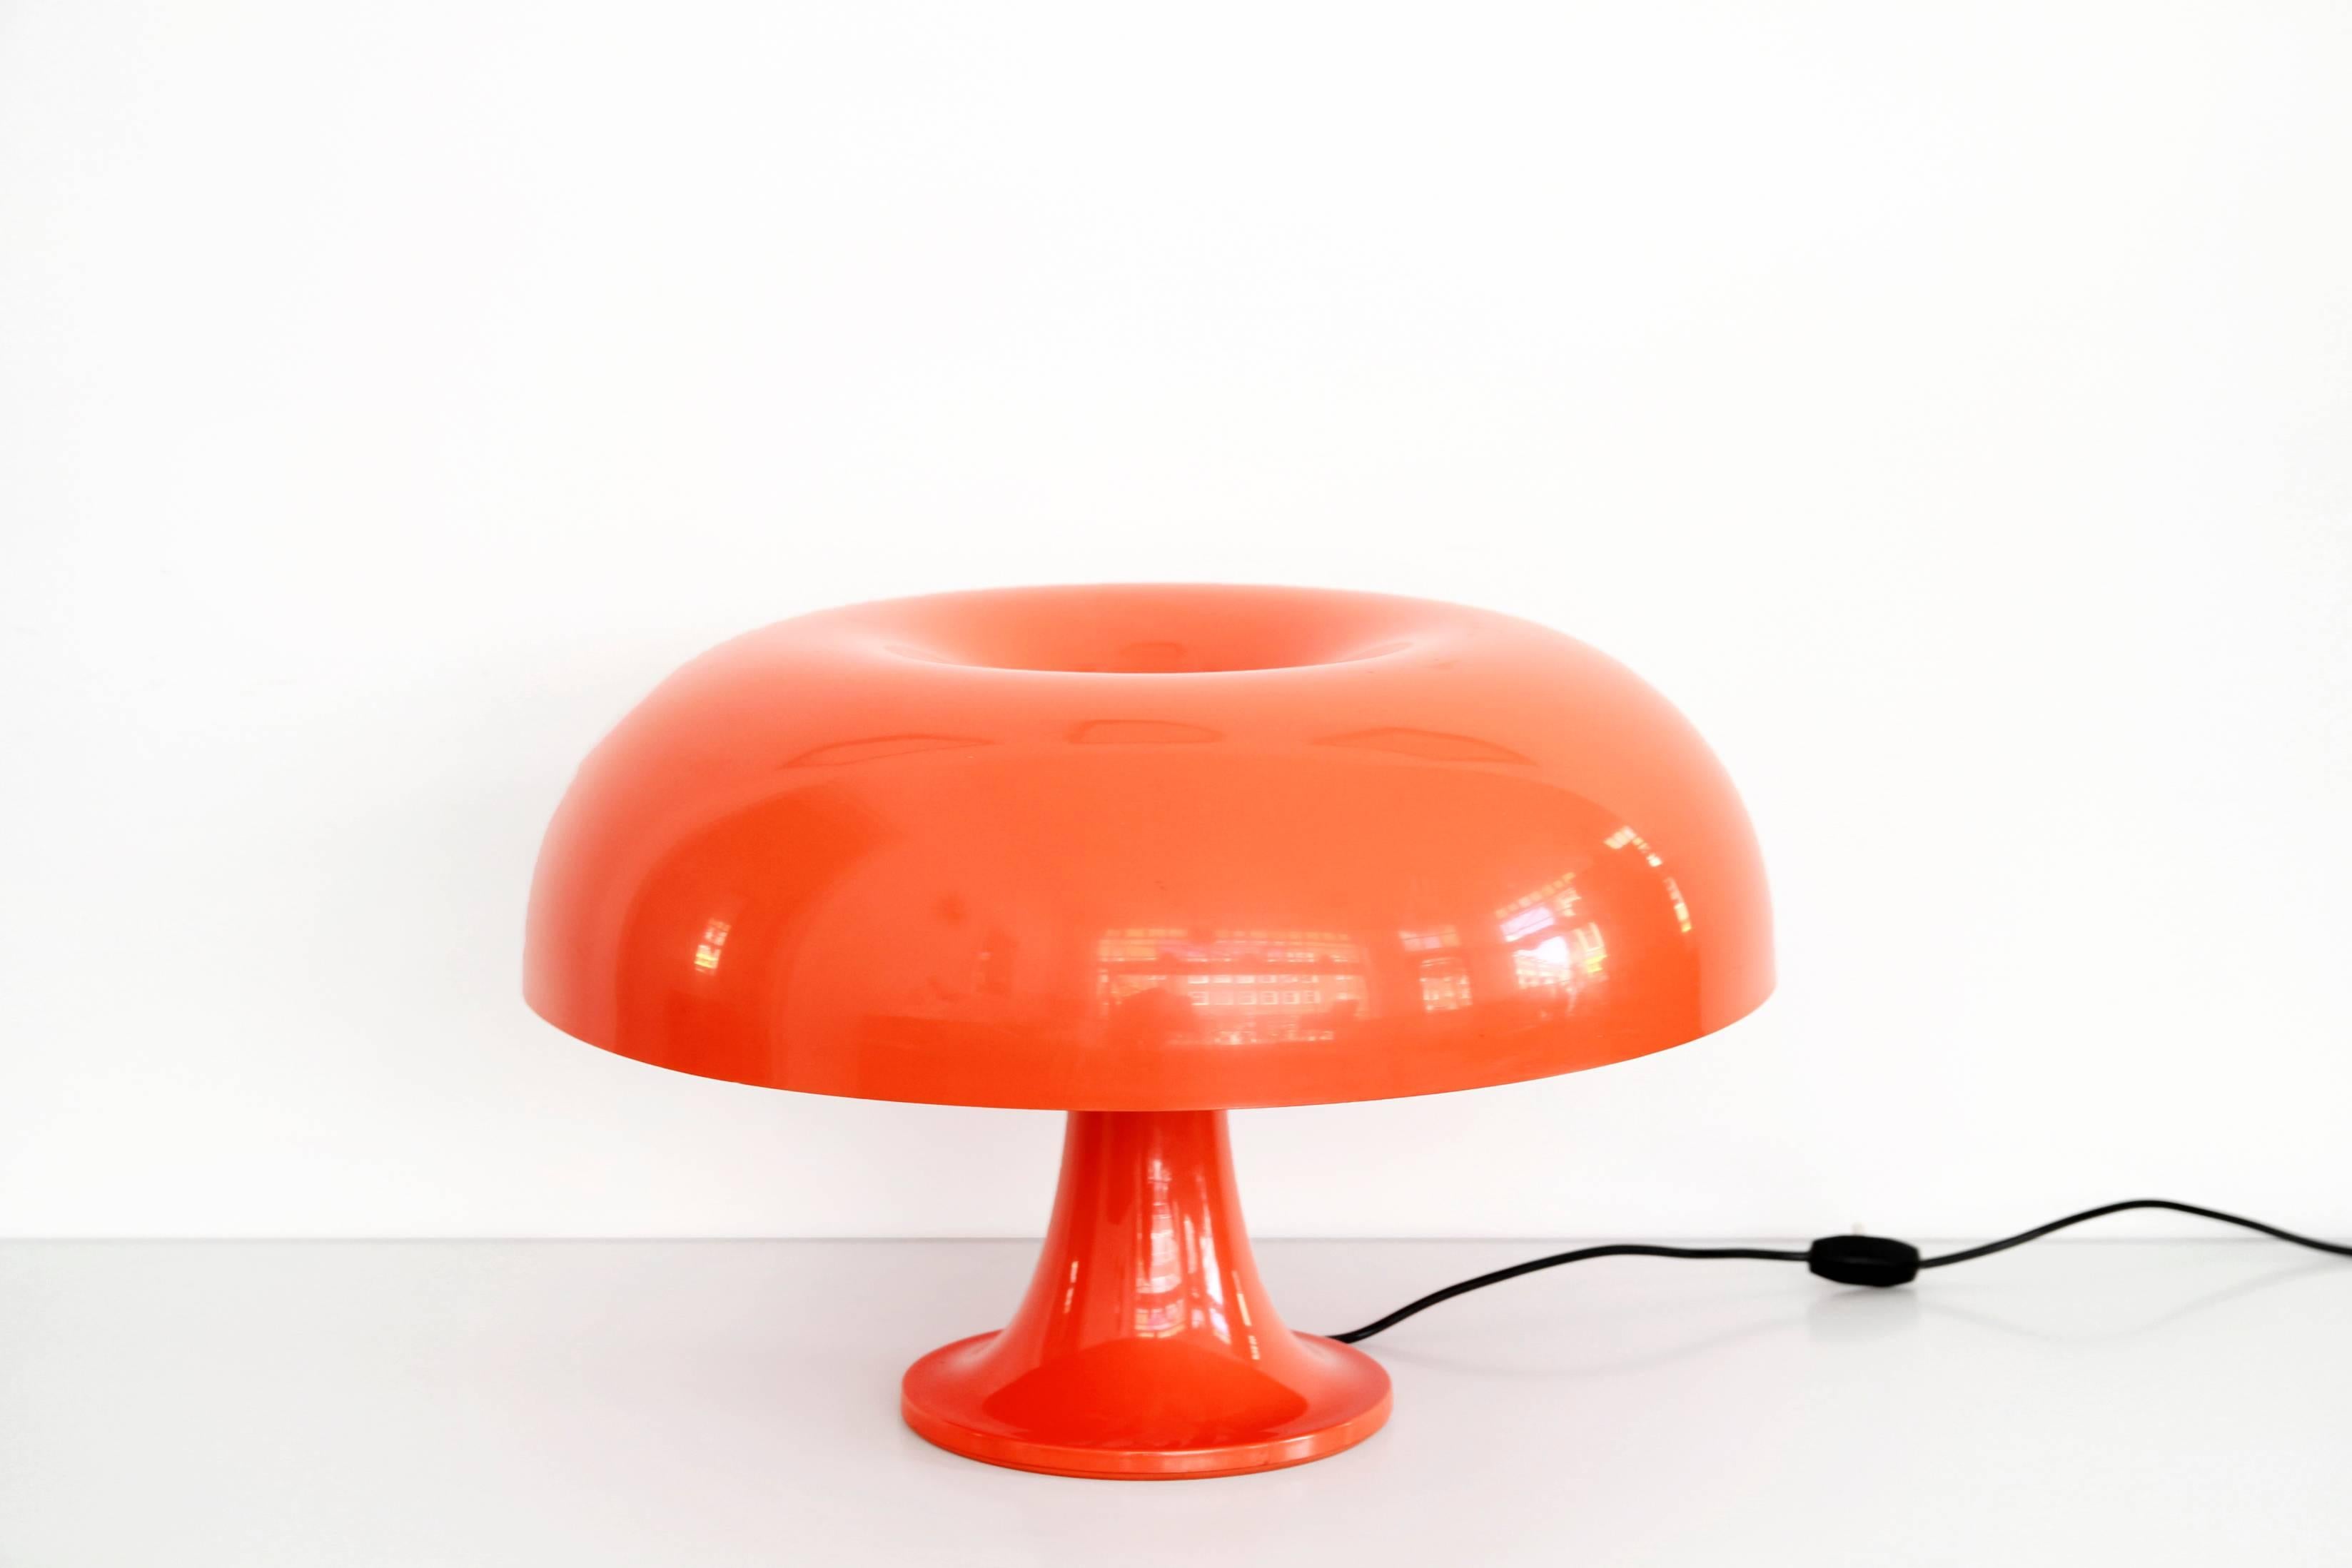 Magnificent mushroom lamp designed by Giancarlo Mattioli for Artemide, Italy. The Italian design lamp is made of orange plastic. The lamp has four E14 fittings, which ensures that the lamp can give off plenty of light. 
This lamp is a real